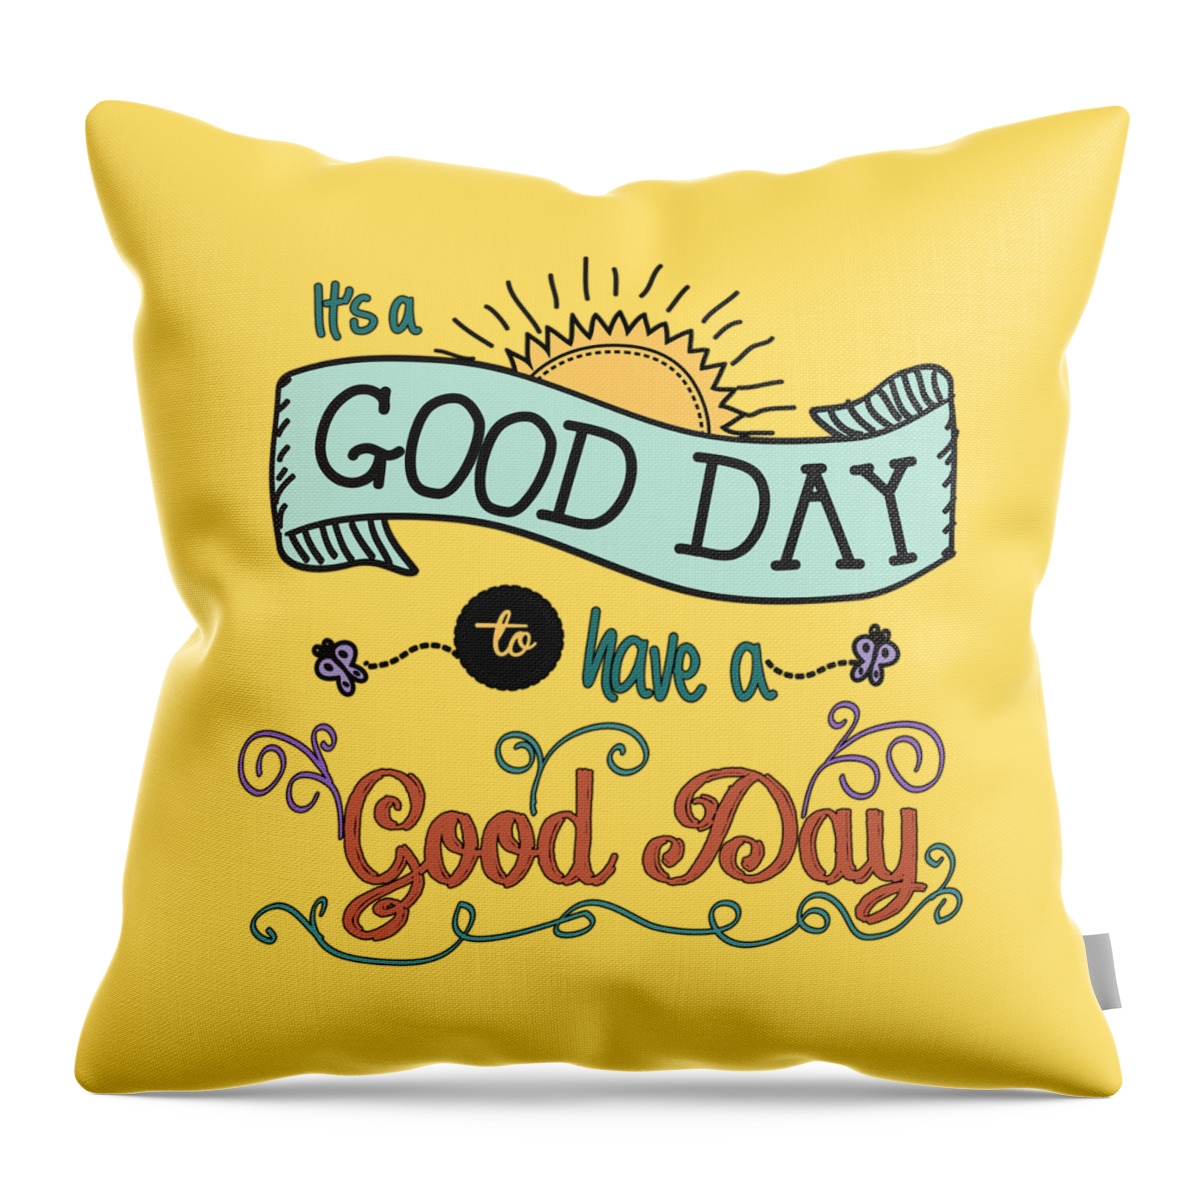 Vintage Throw Pillow featuring the drawing It's a Good Day with Color by Jan Marvin by Jan Marvin